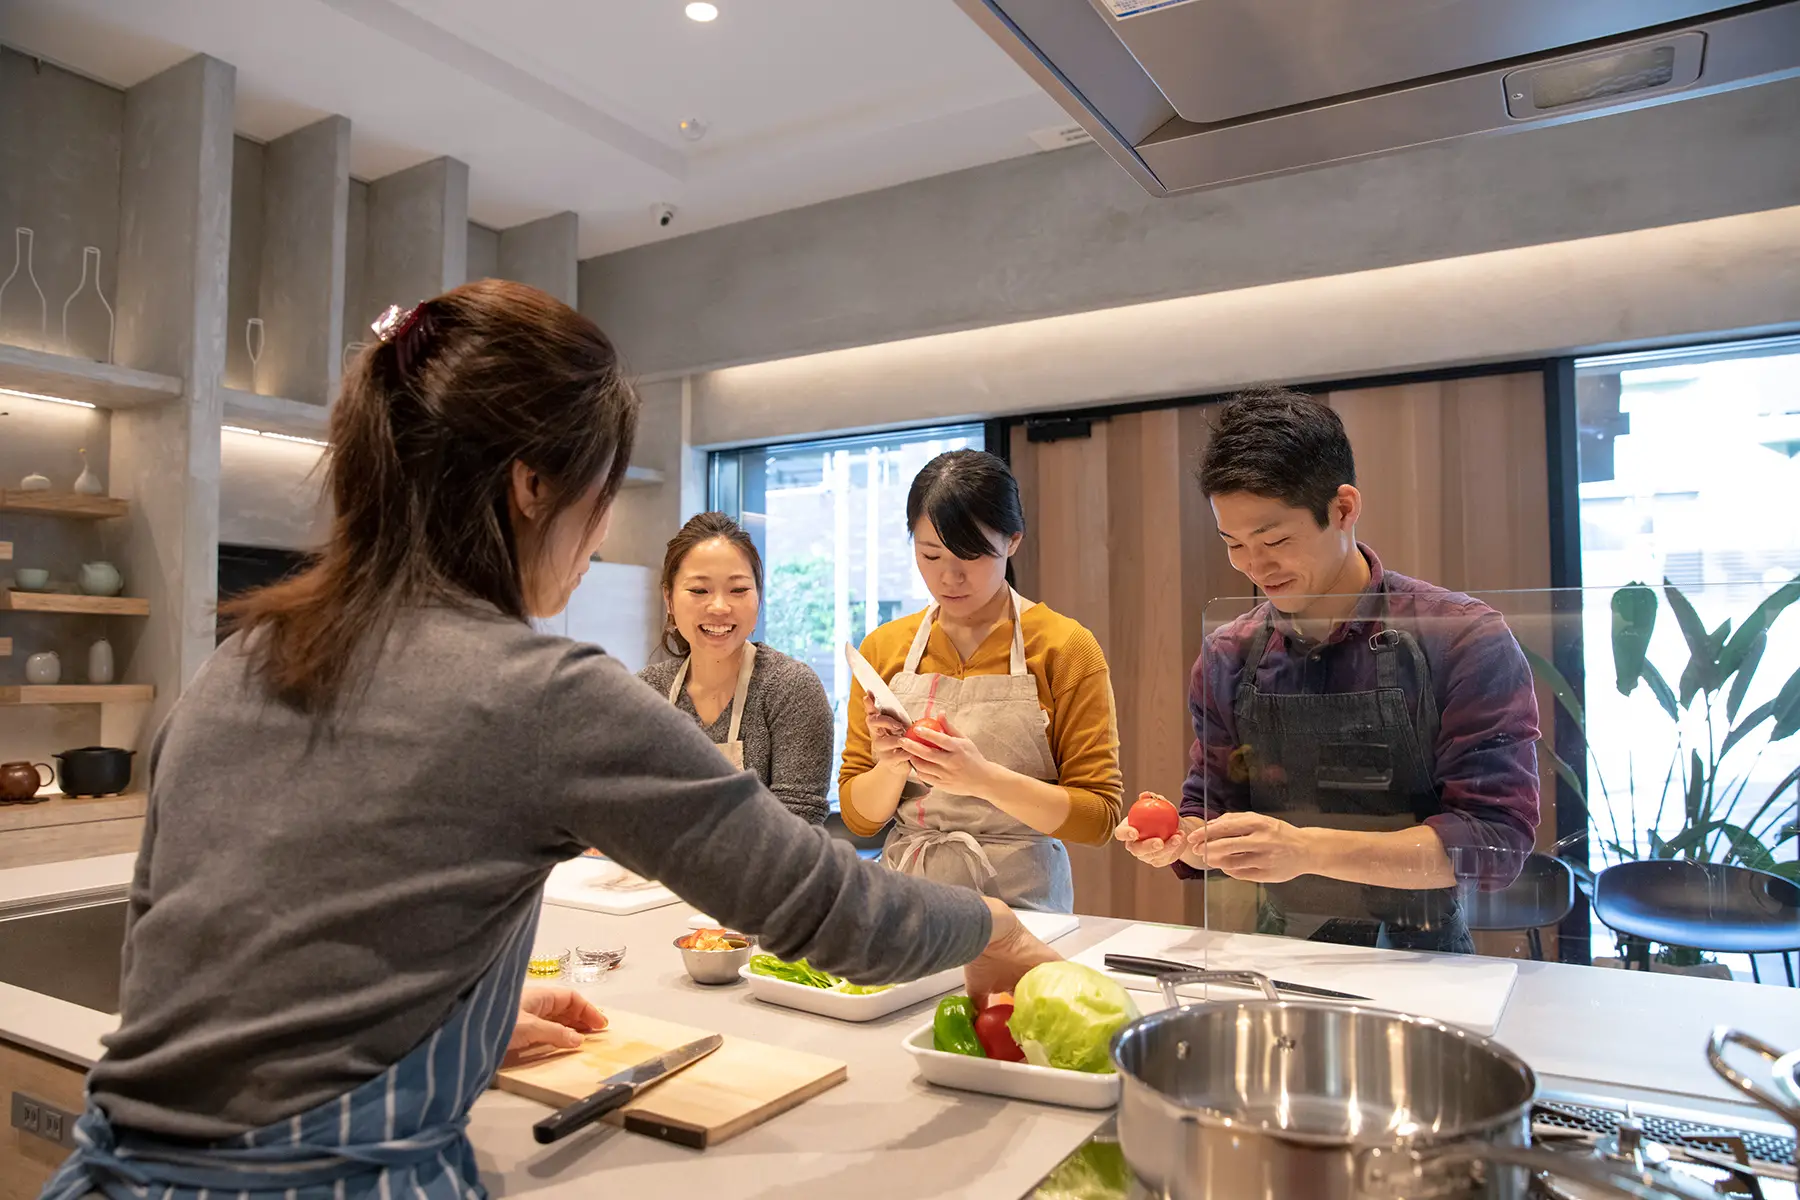 People at a cooking class